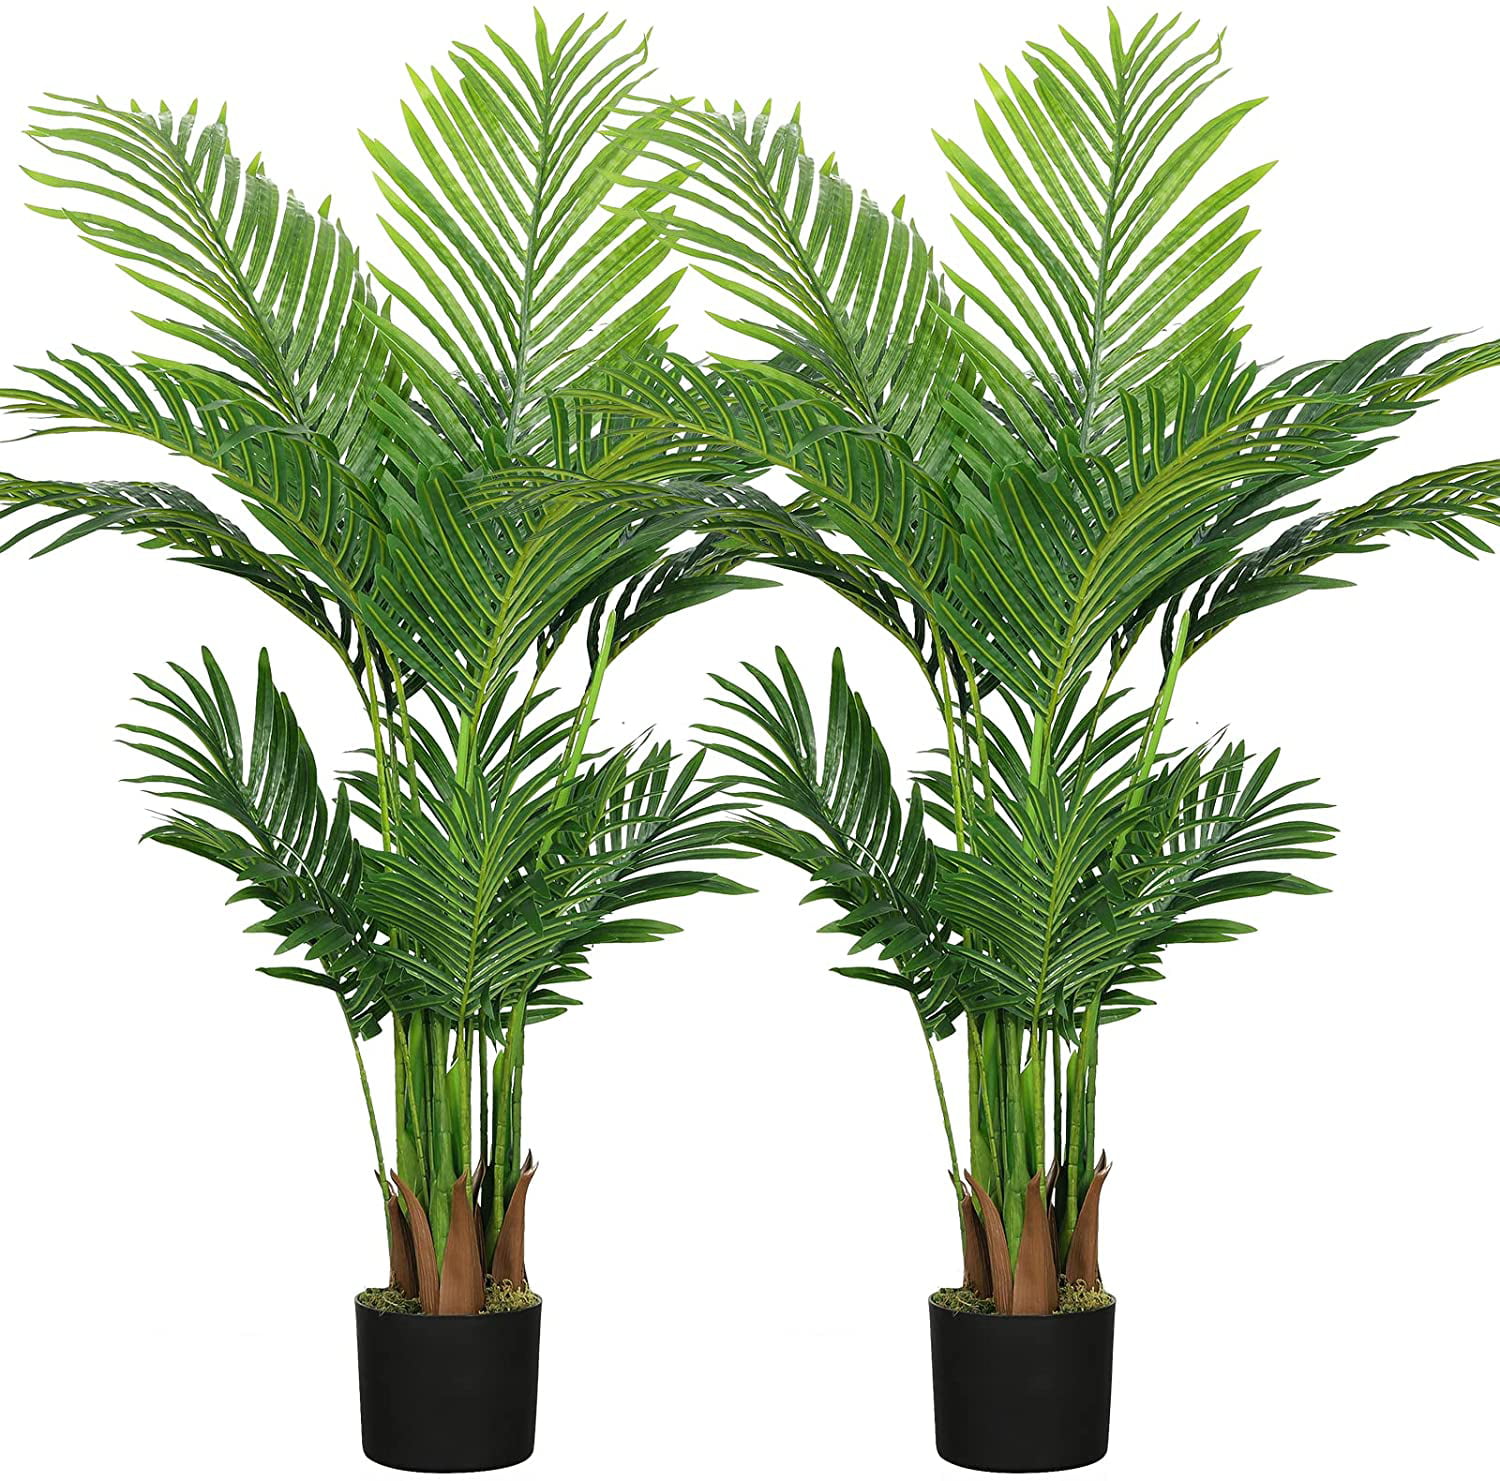 Outdoor Home Decor lastic Artificial Bamboo Leaf Tree Green Plants Nice Kit 